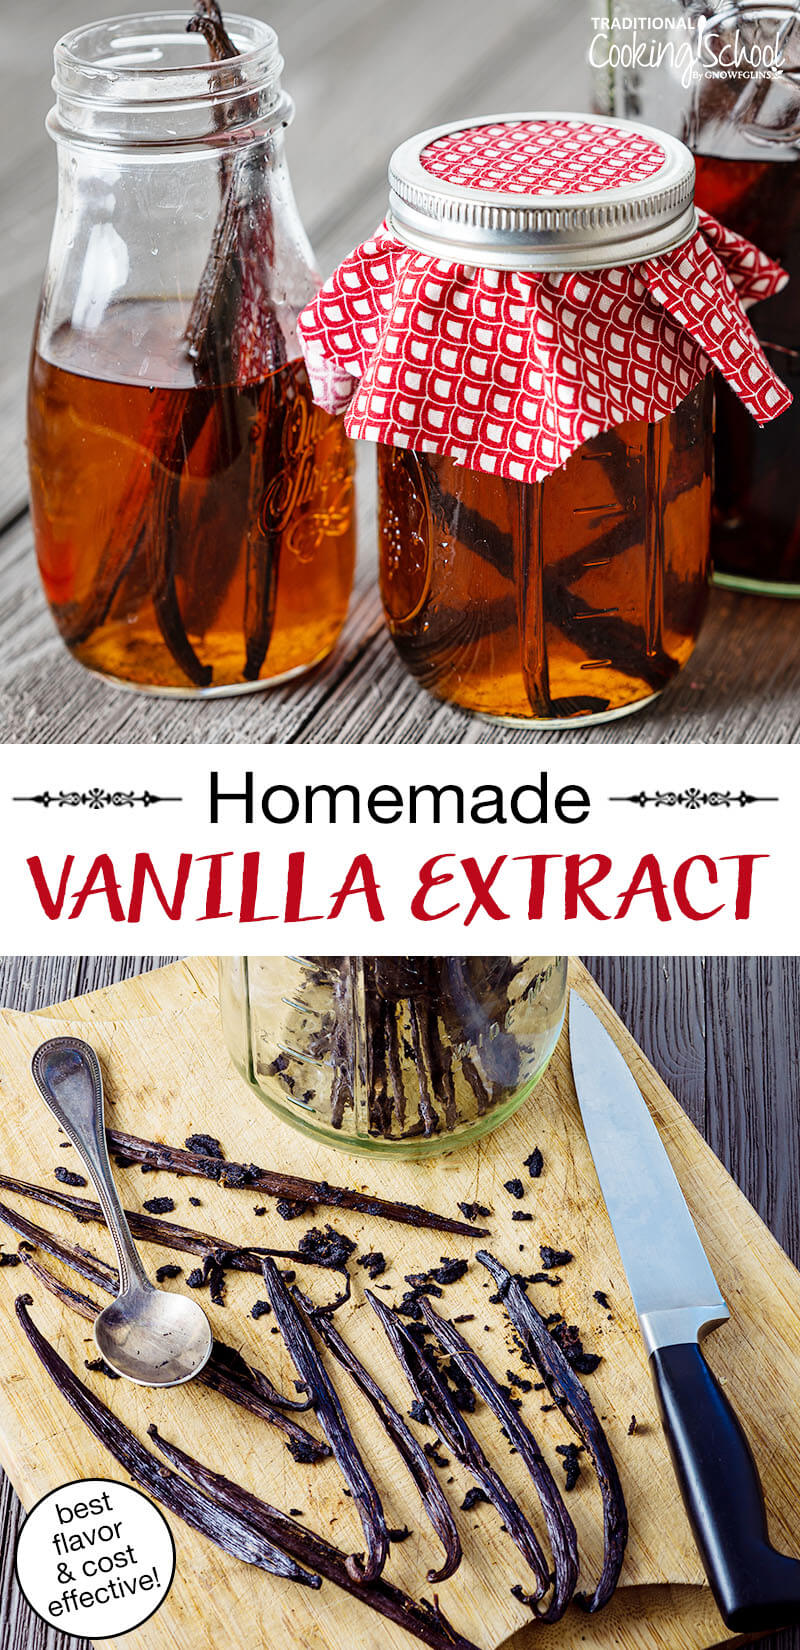 photo collage of combining vodka and vanilla beans in assorted small jars with text overlay: "Homemade Vanilla Extract (best flavor & cost effective!)"